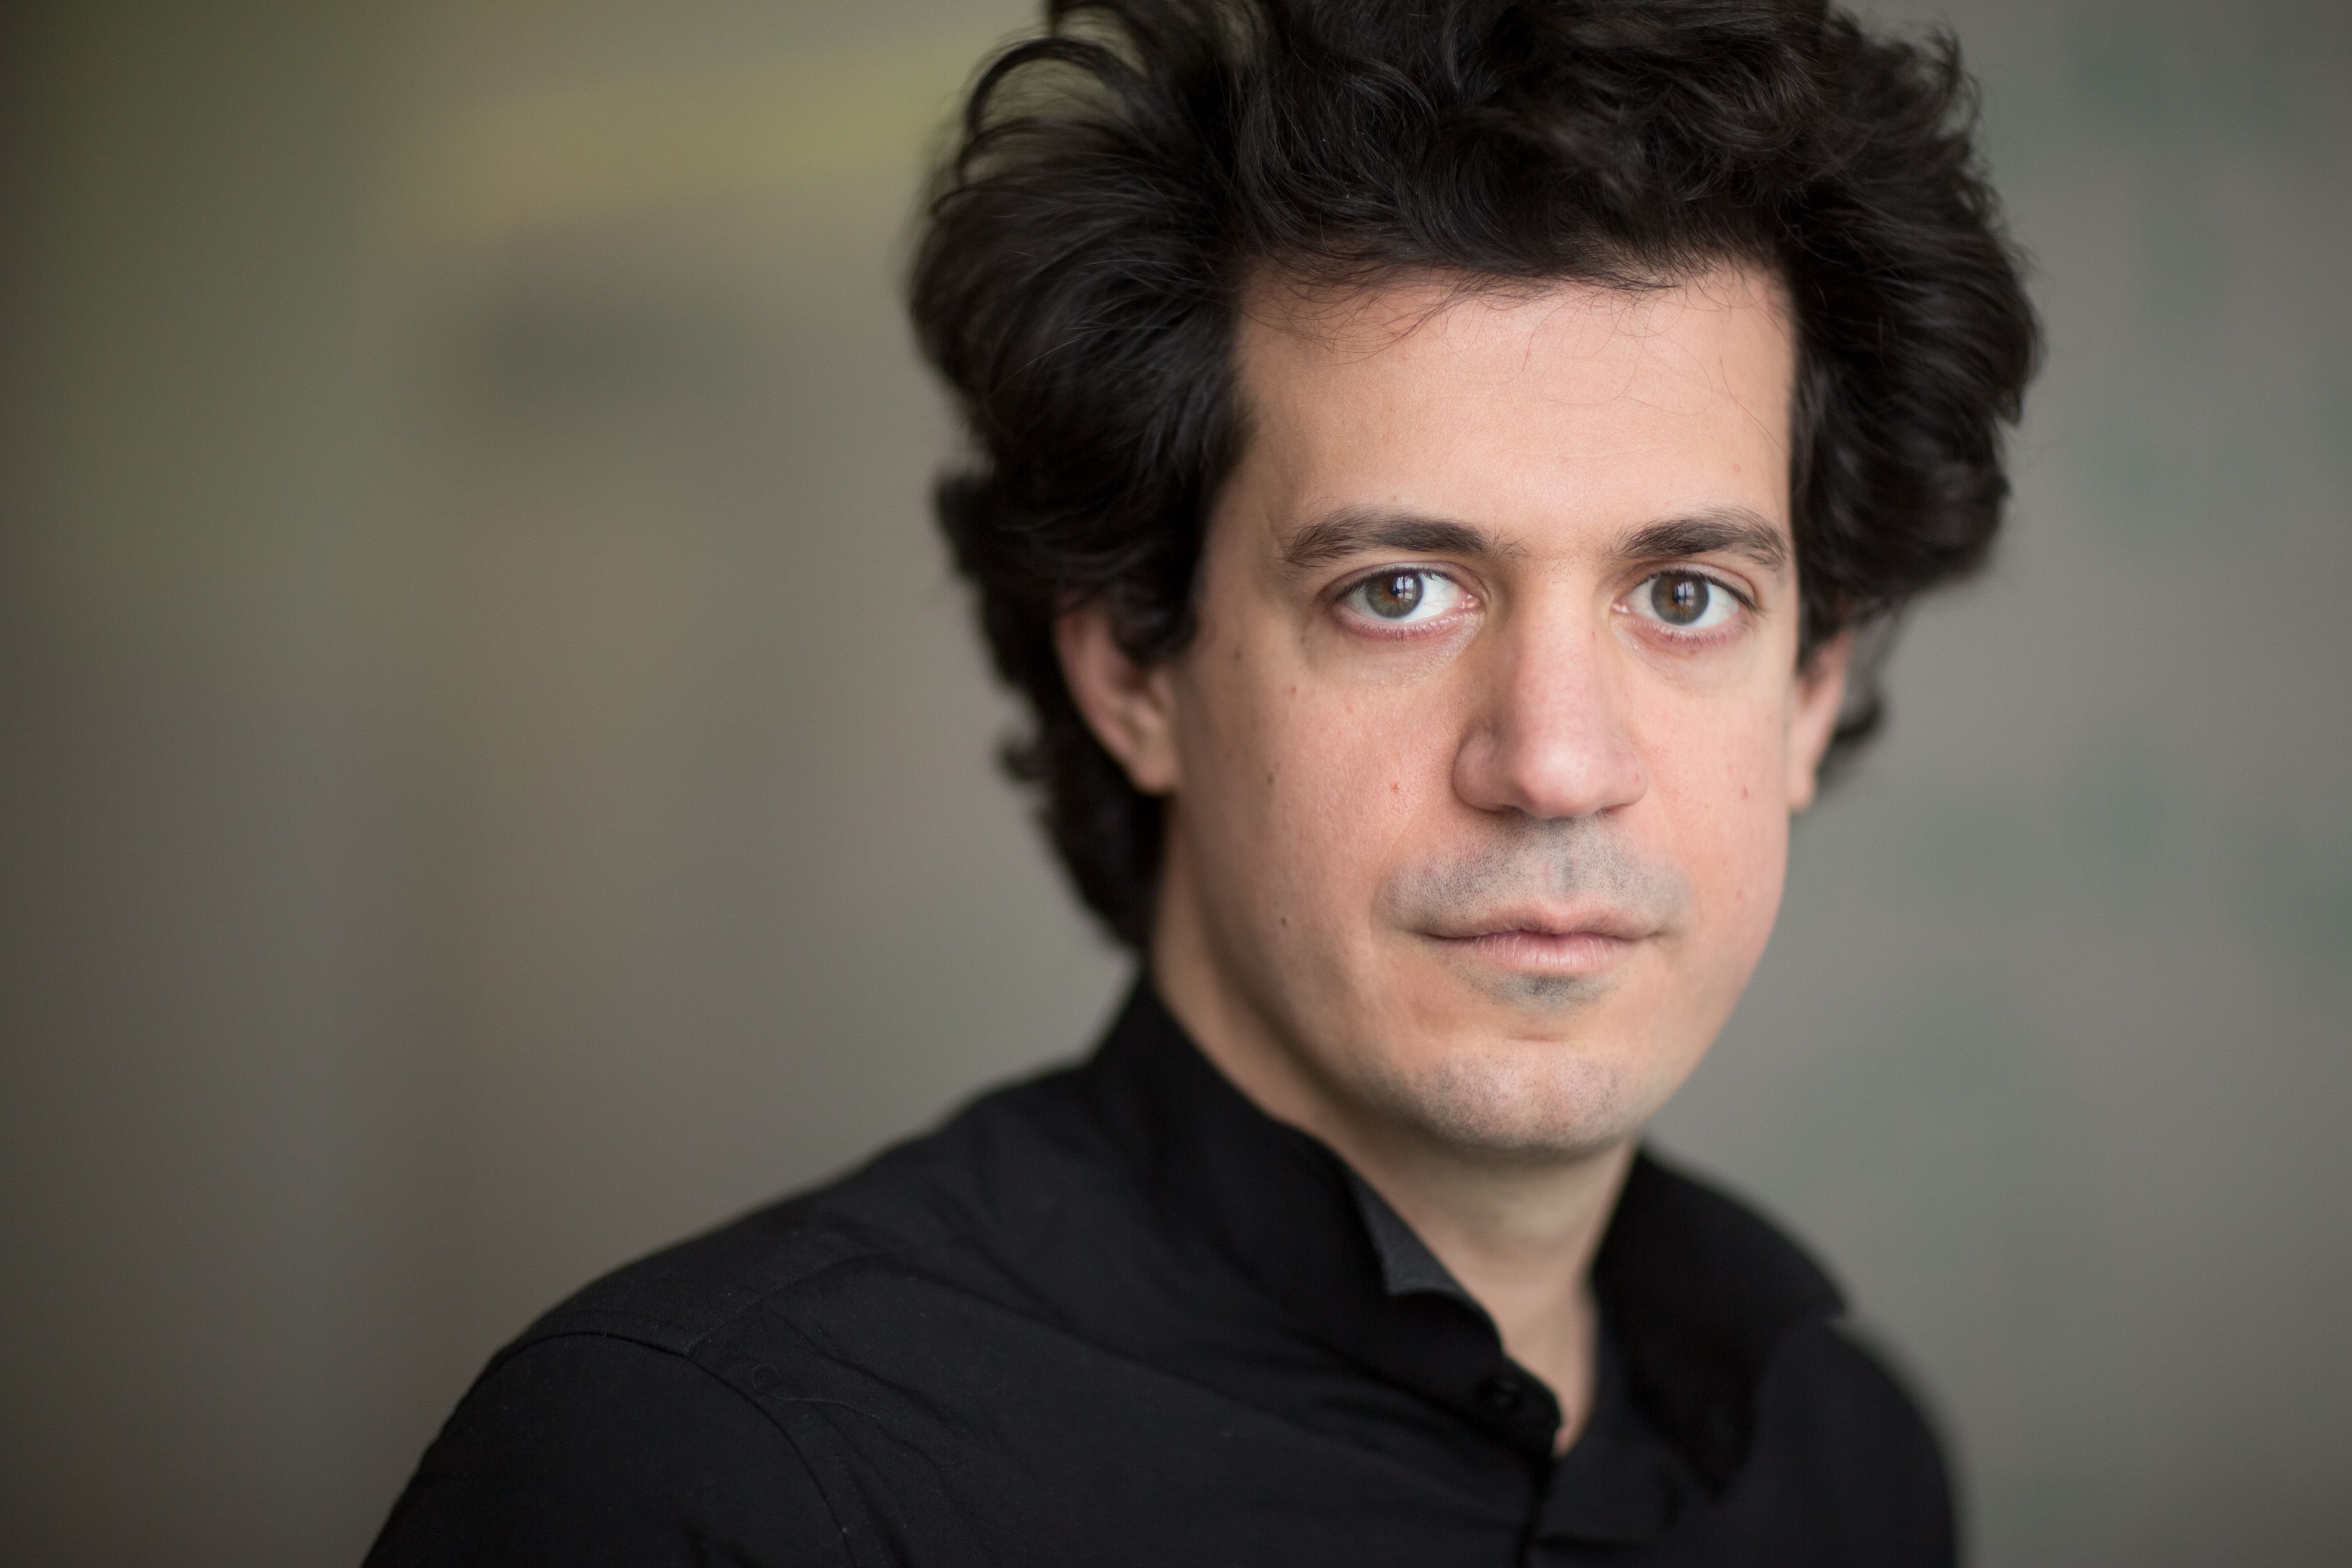 Constantinos Daskalakis, Professor of EECS at MIT, and member of Computer Science and AI Laboratory